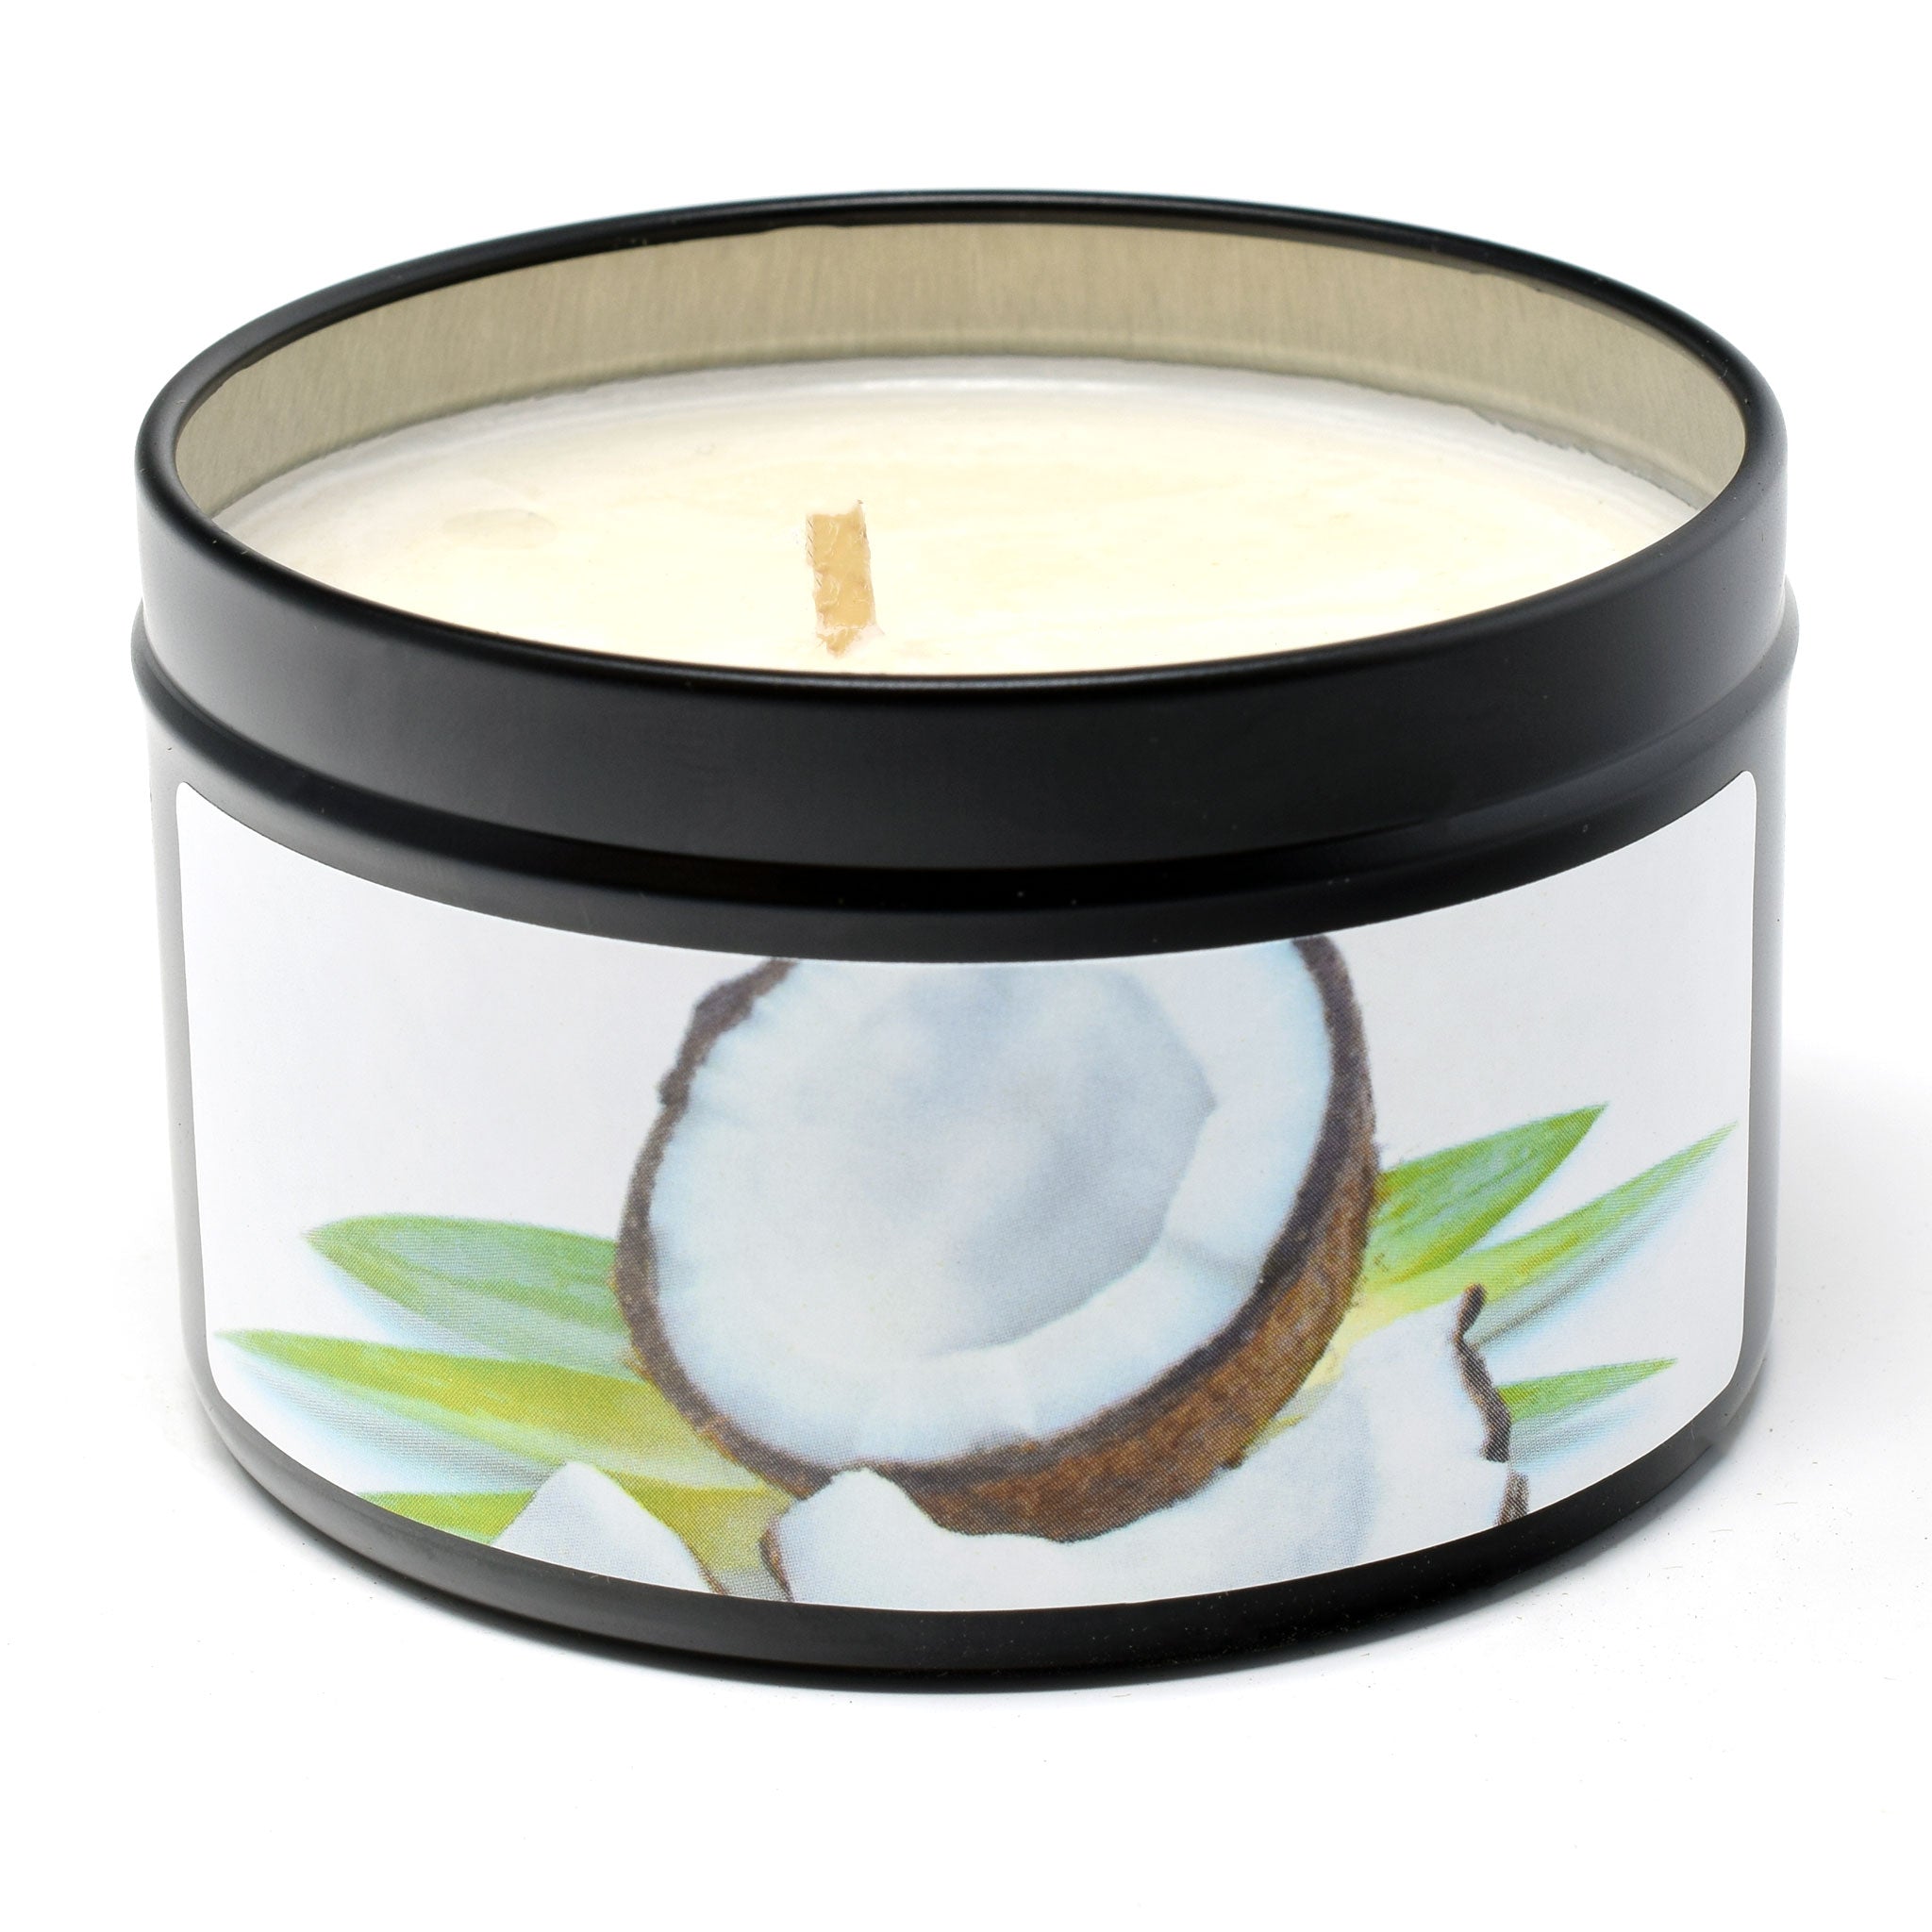 Coconut Scented Candle, Toasted Coconut